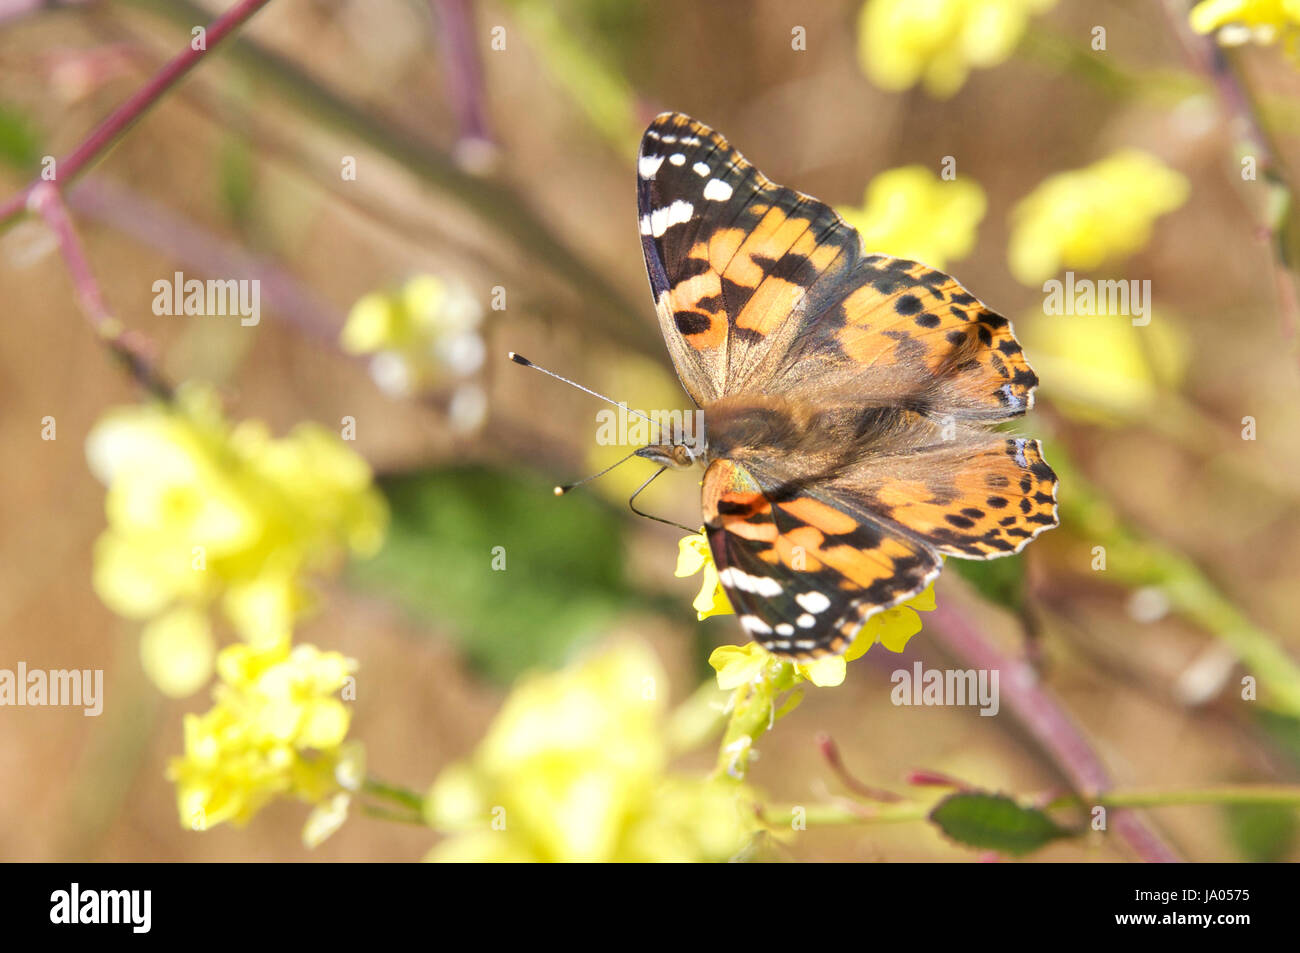 The Cynthia group of colourful butterflies, commonly called painted ladies, comprises a subgenus of the genus Vanessa in the family Nymphalidae. Drink Stock Photo